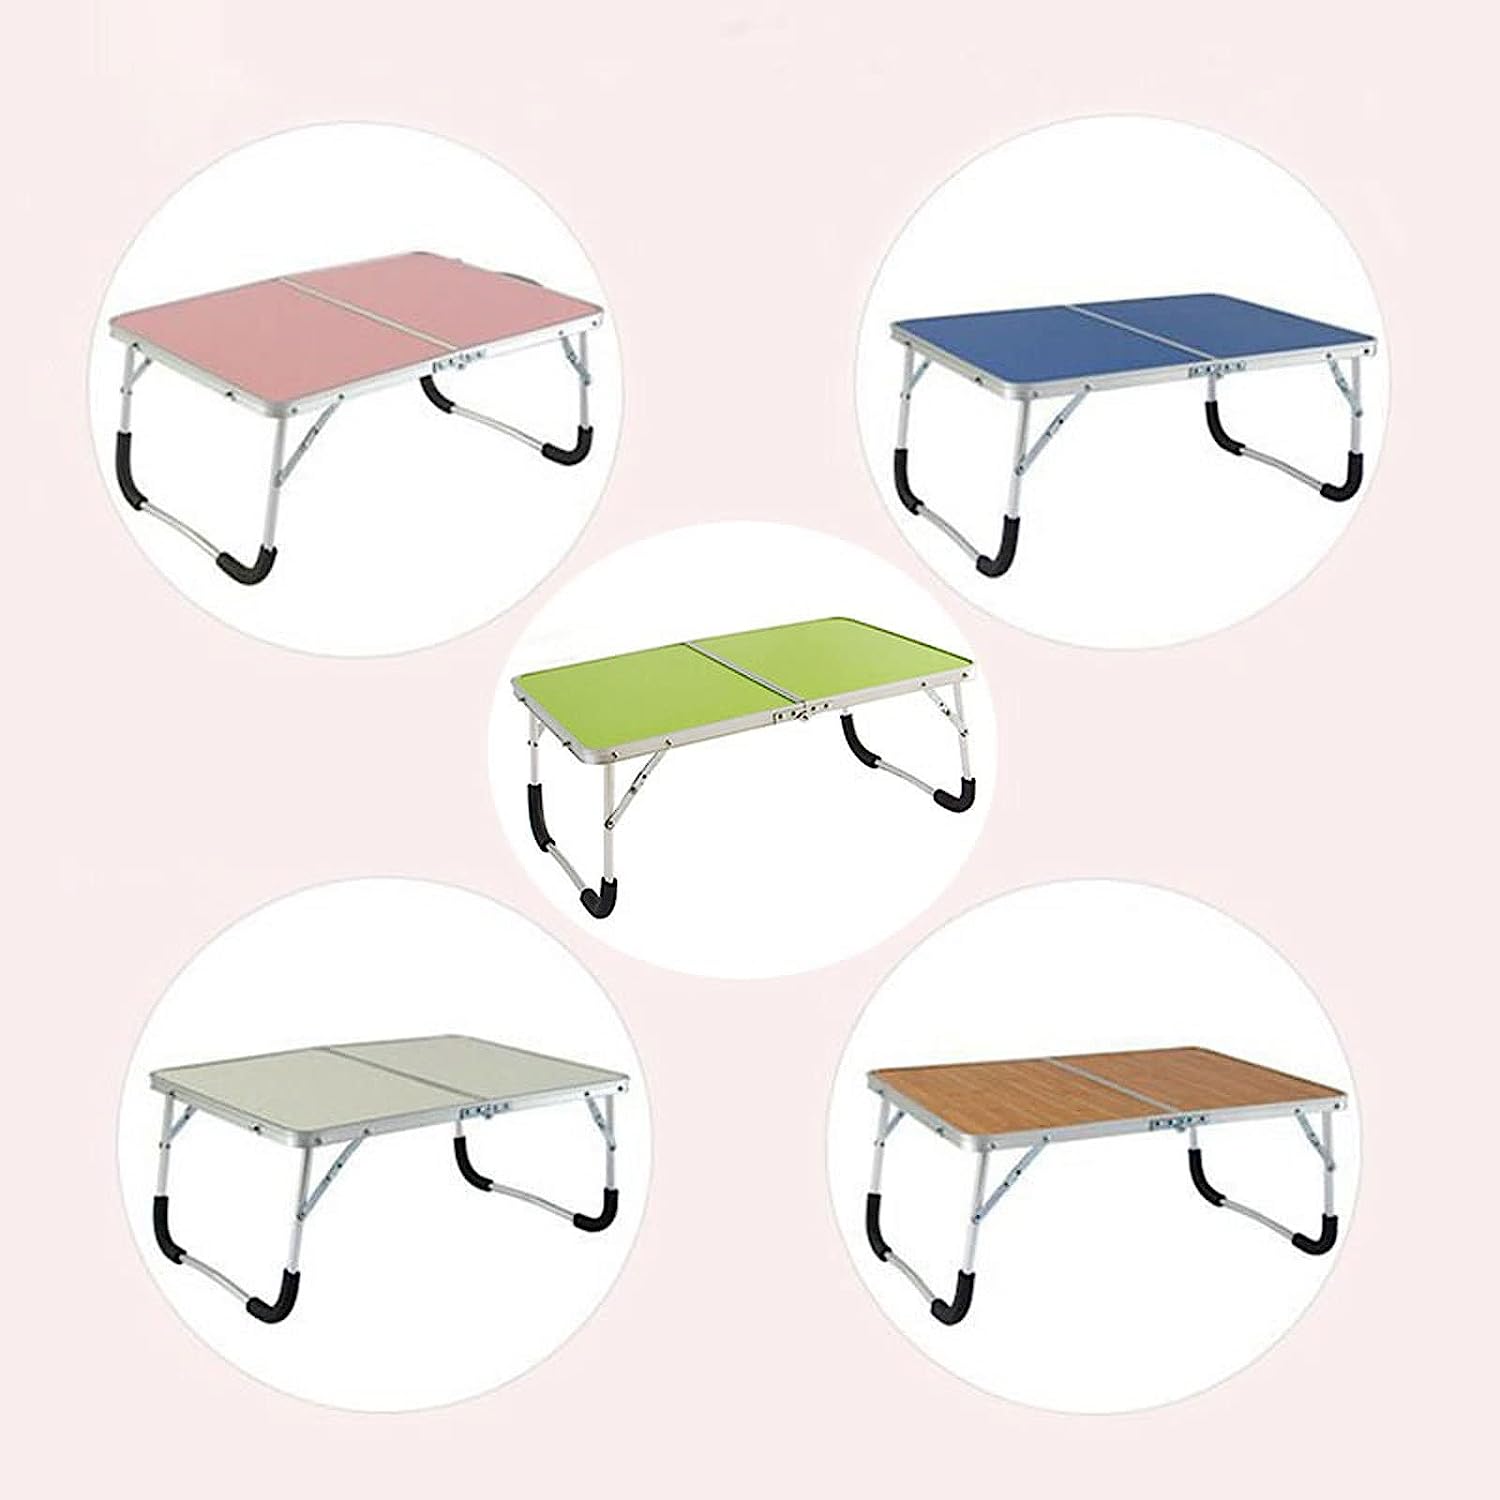 Portable Folding Mini Table with multiple colors